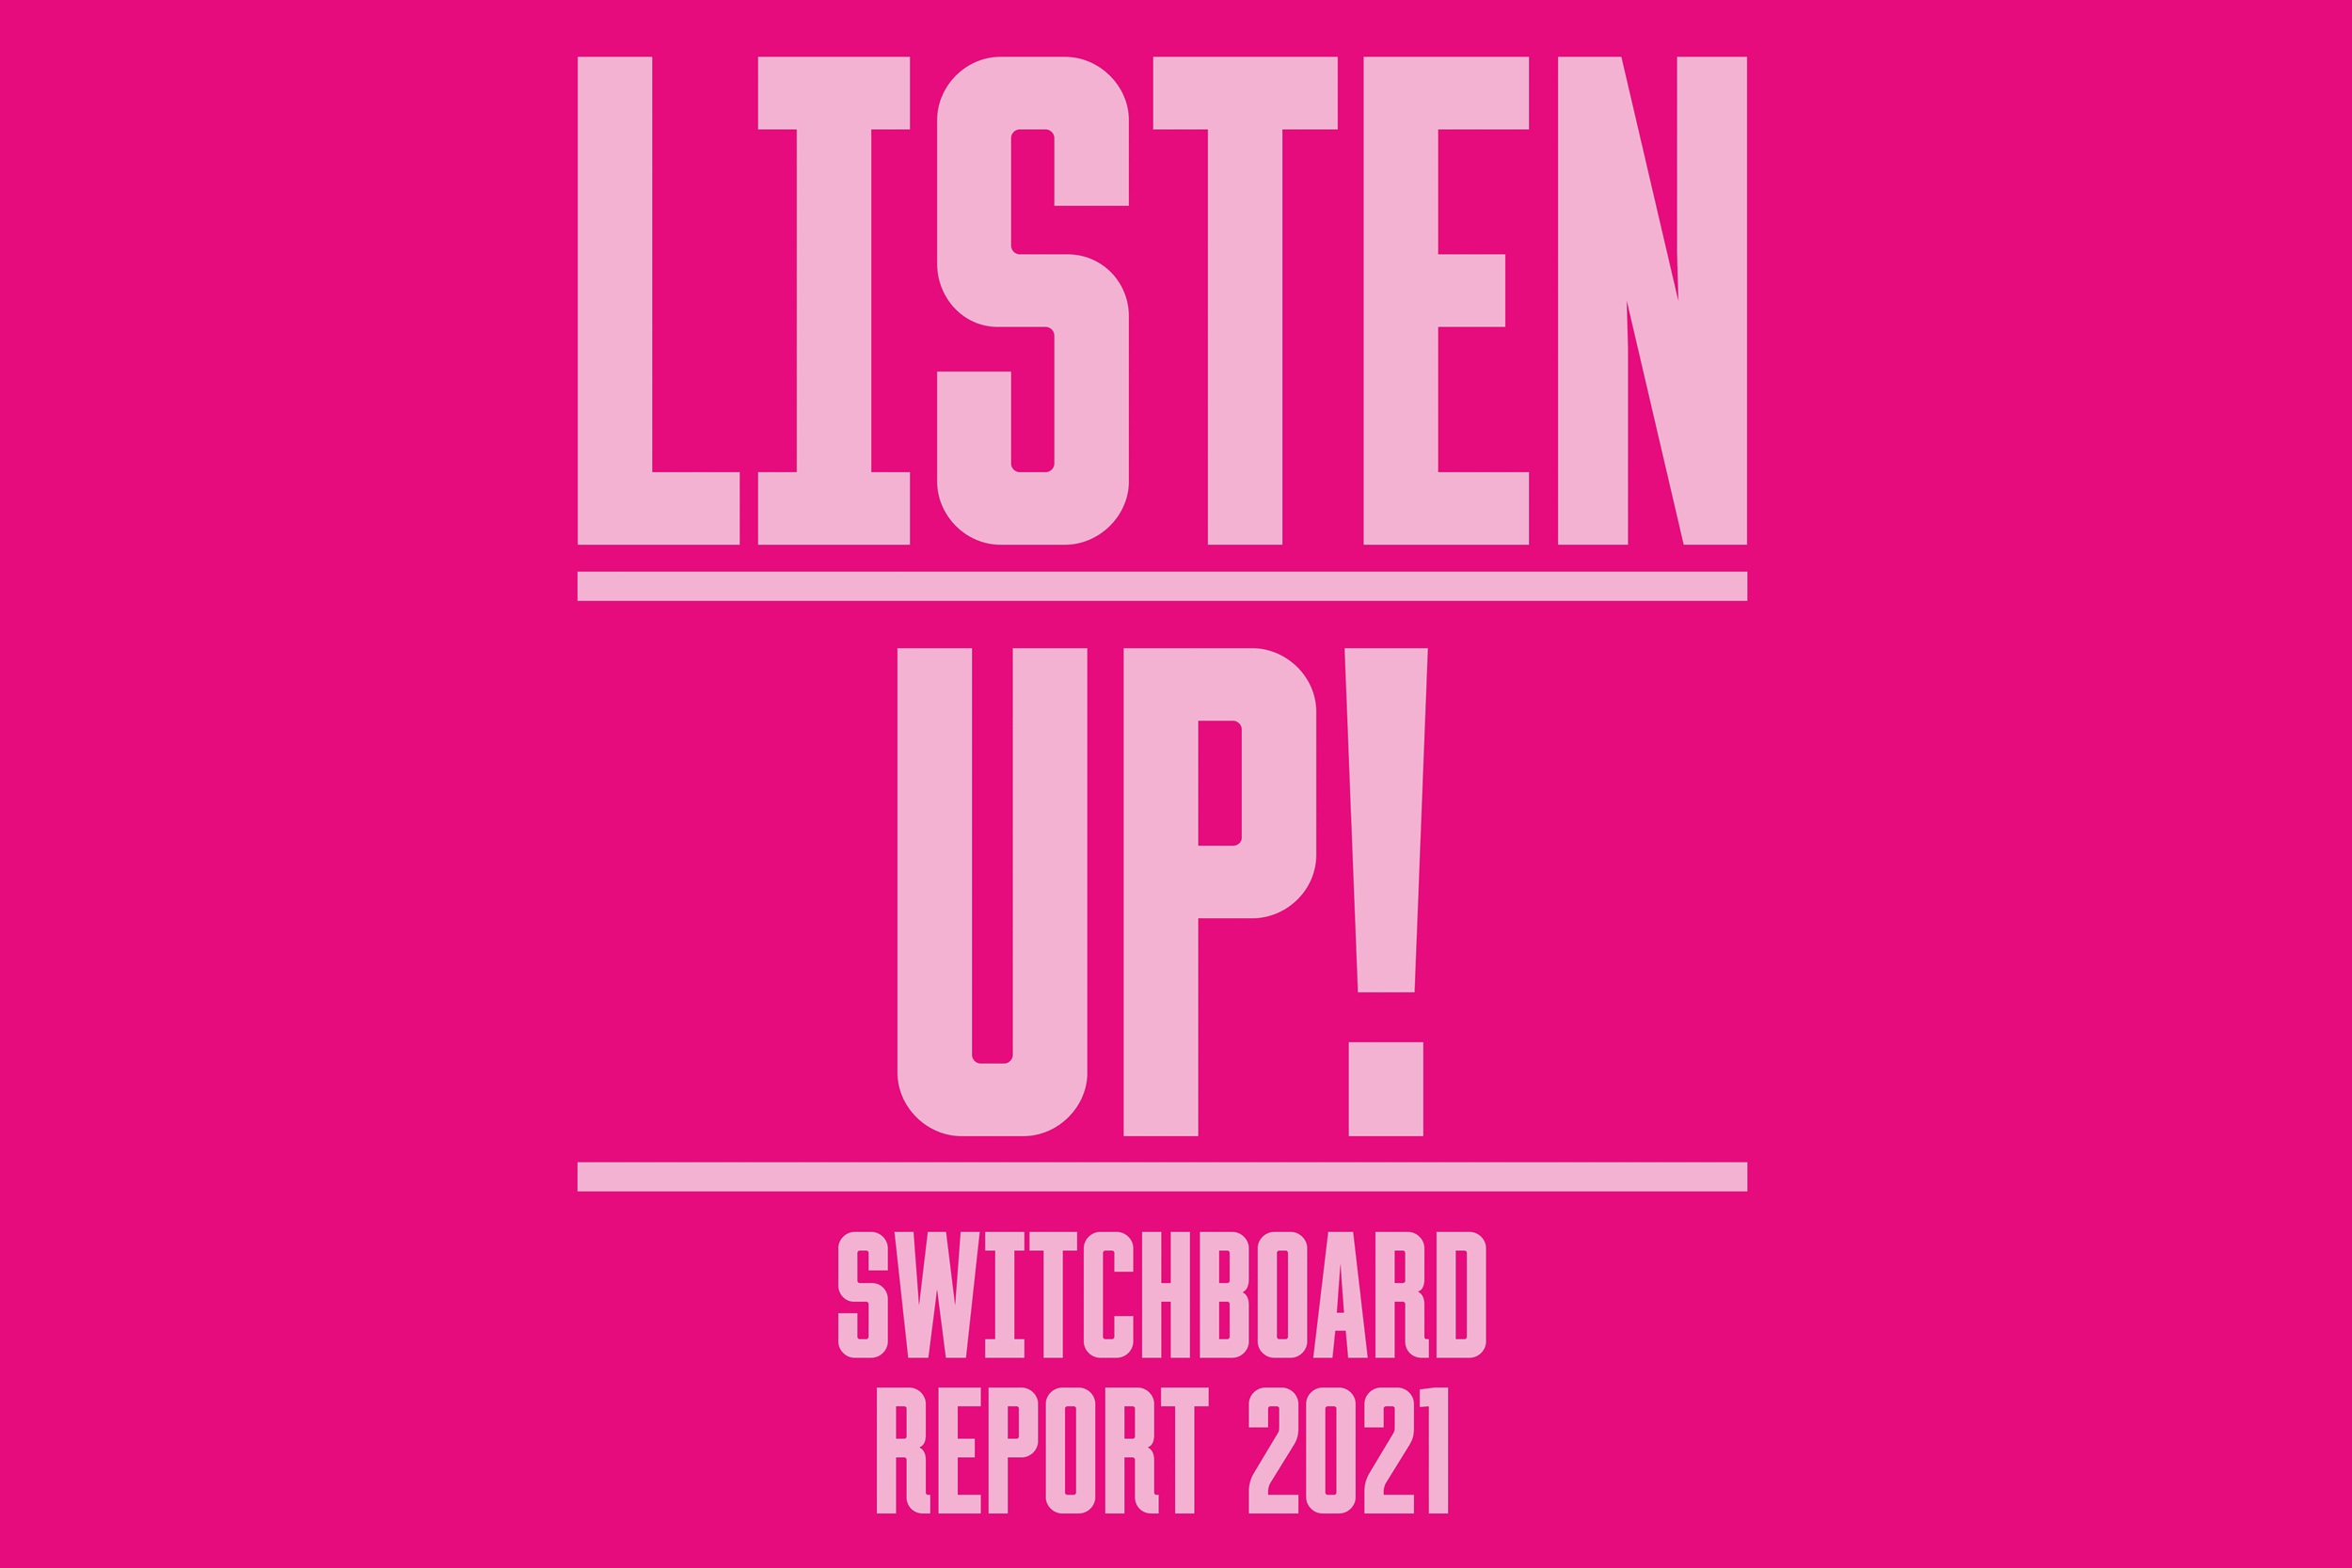 Switchboard publishes ‘LISTEN UP!’ impact report